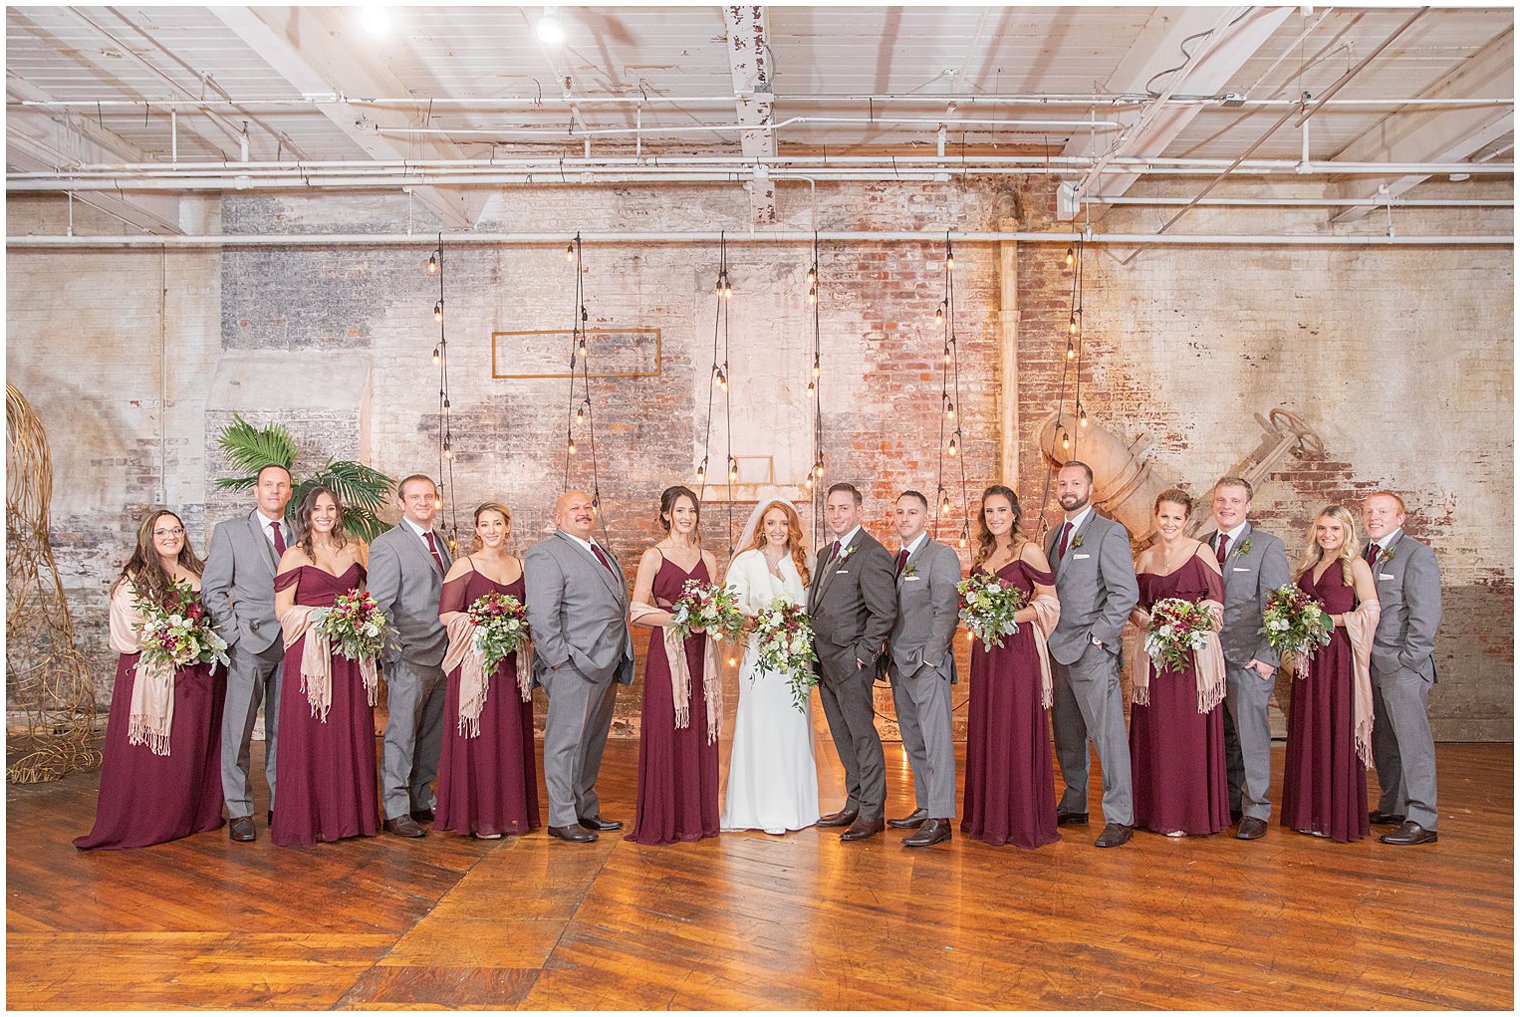 bridal party in grey and burgundy poses by brick wall during Art Factory Studios wedding photos